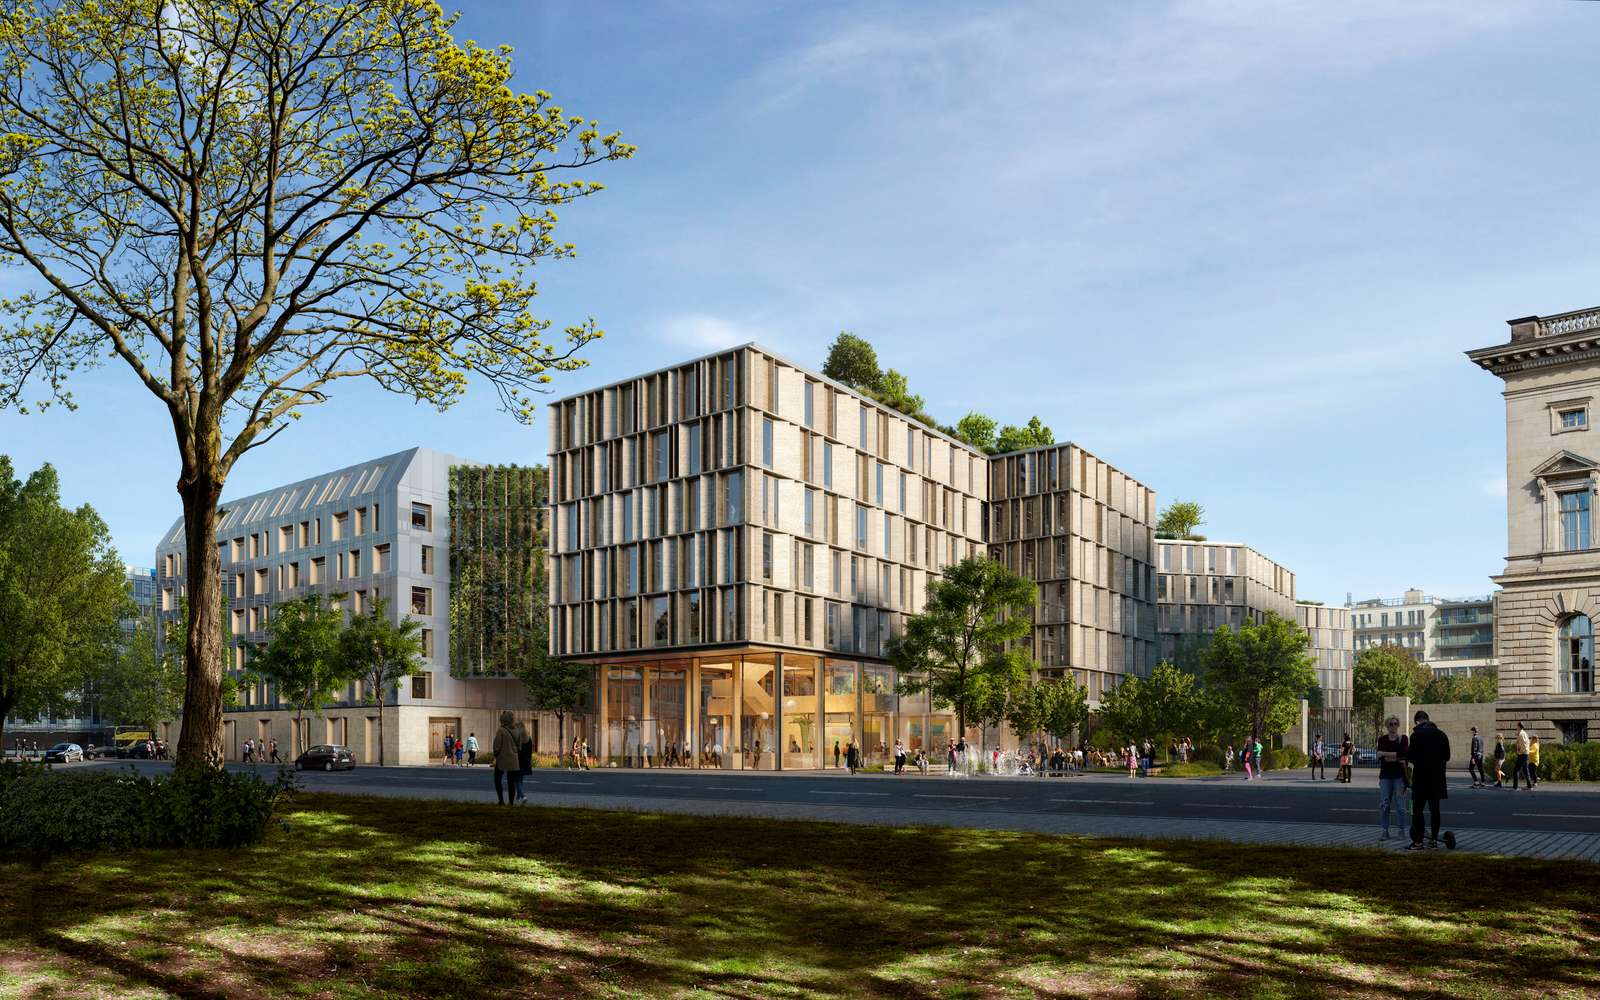 The German Ministry for the Environment BMUCVI02 C.F. Møller Architects CGI by Beauty & the Bit